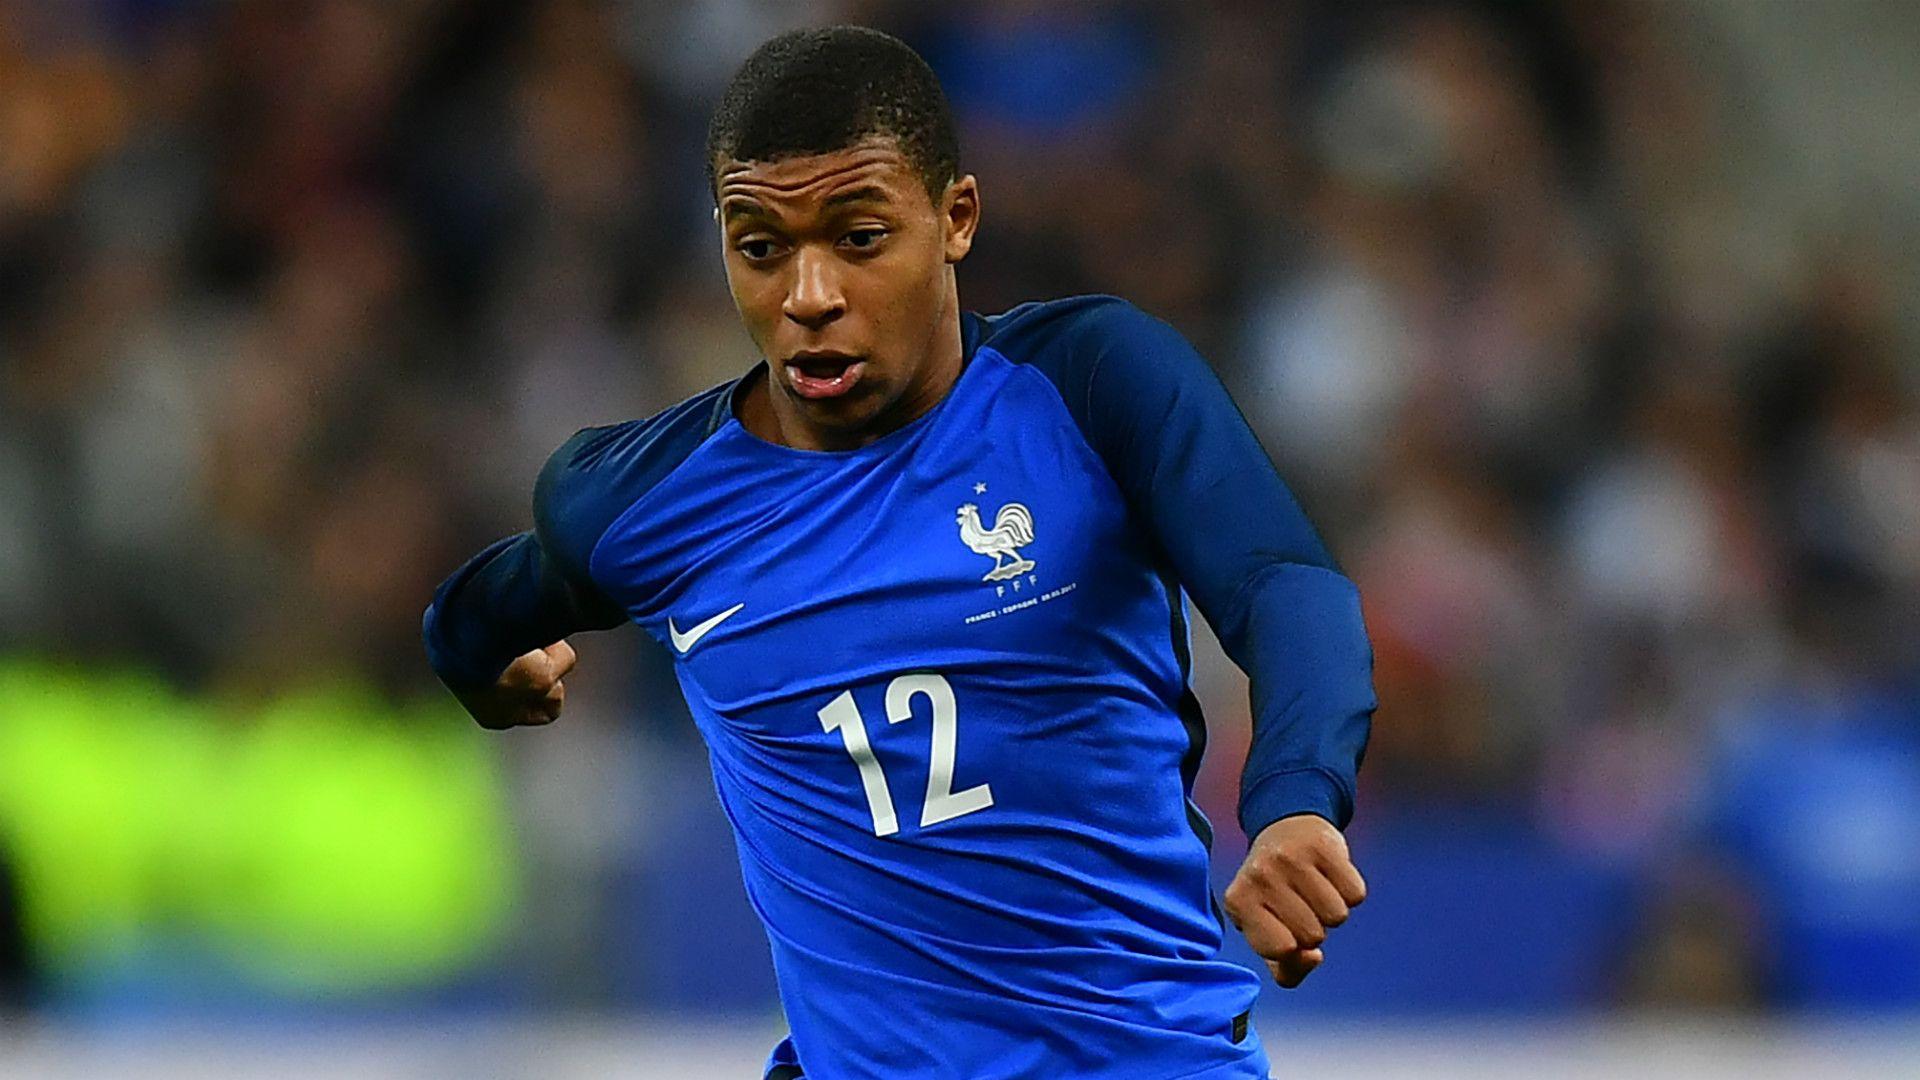 Mbappe, Pogba in France squad as Martial and Mendy miss out